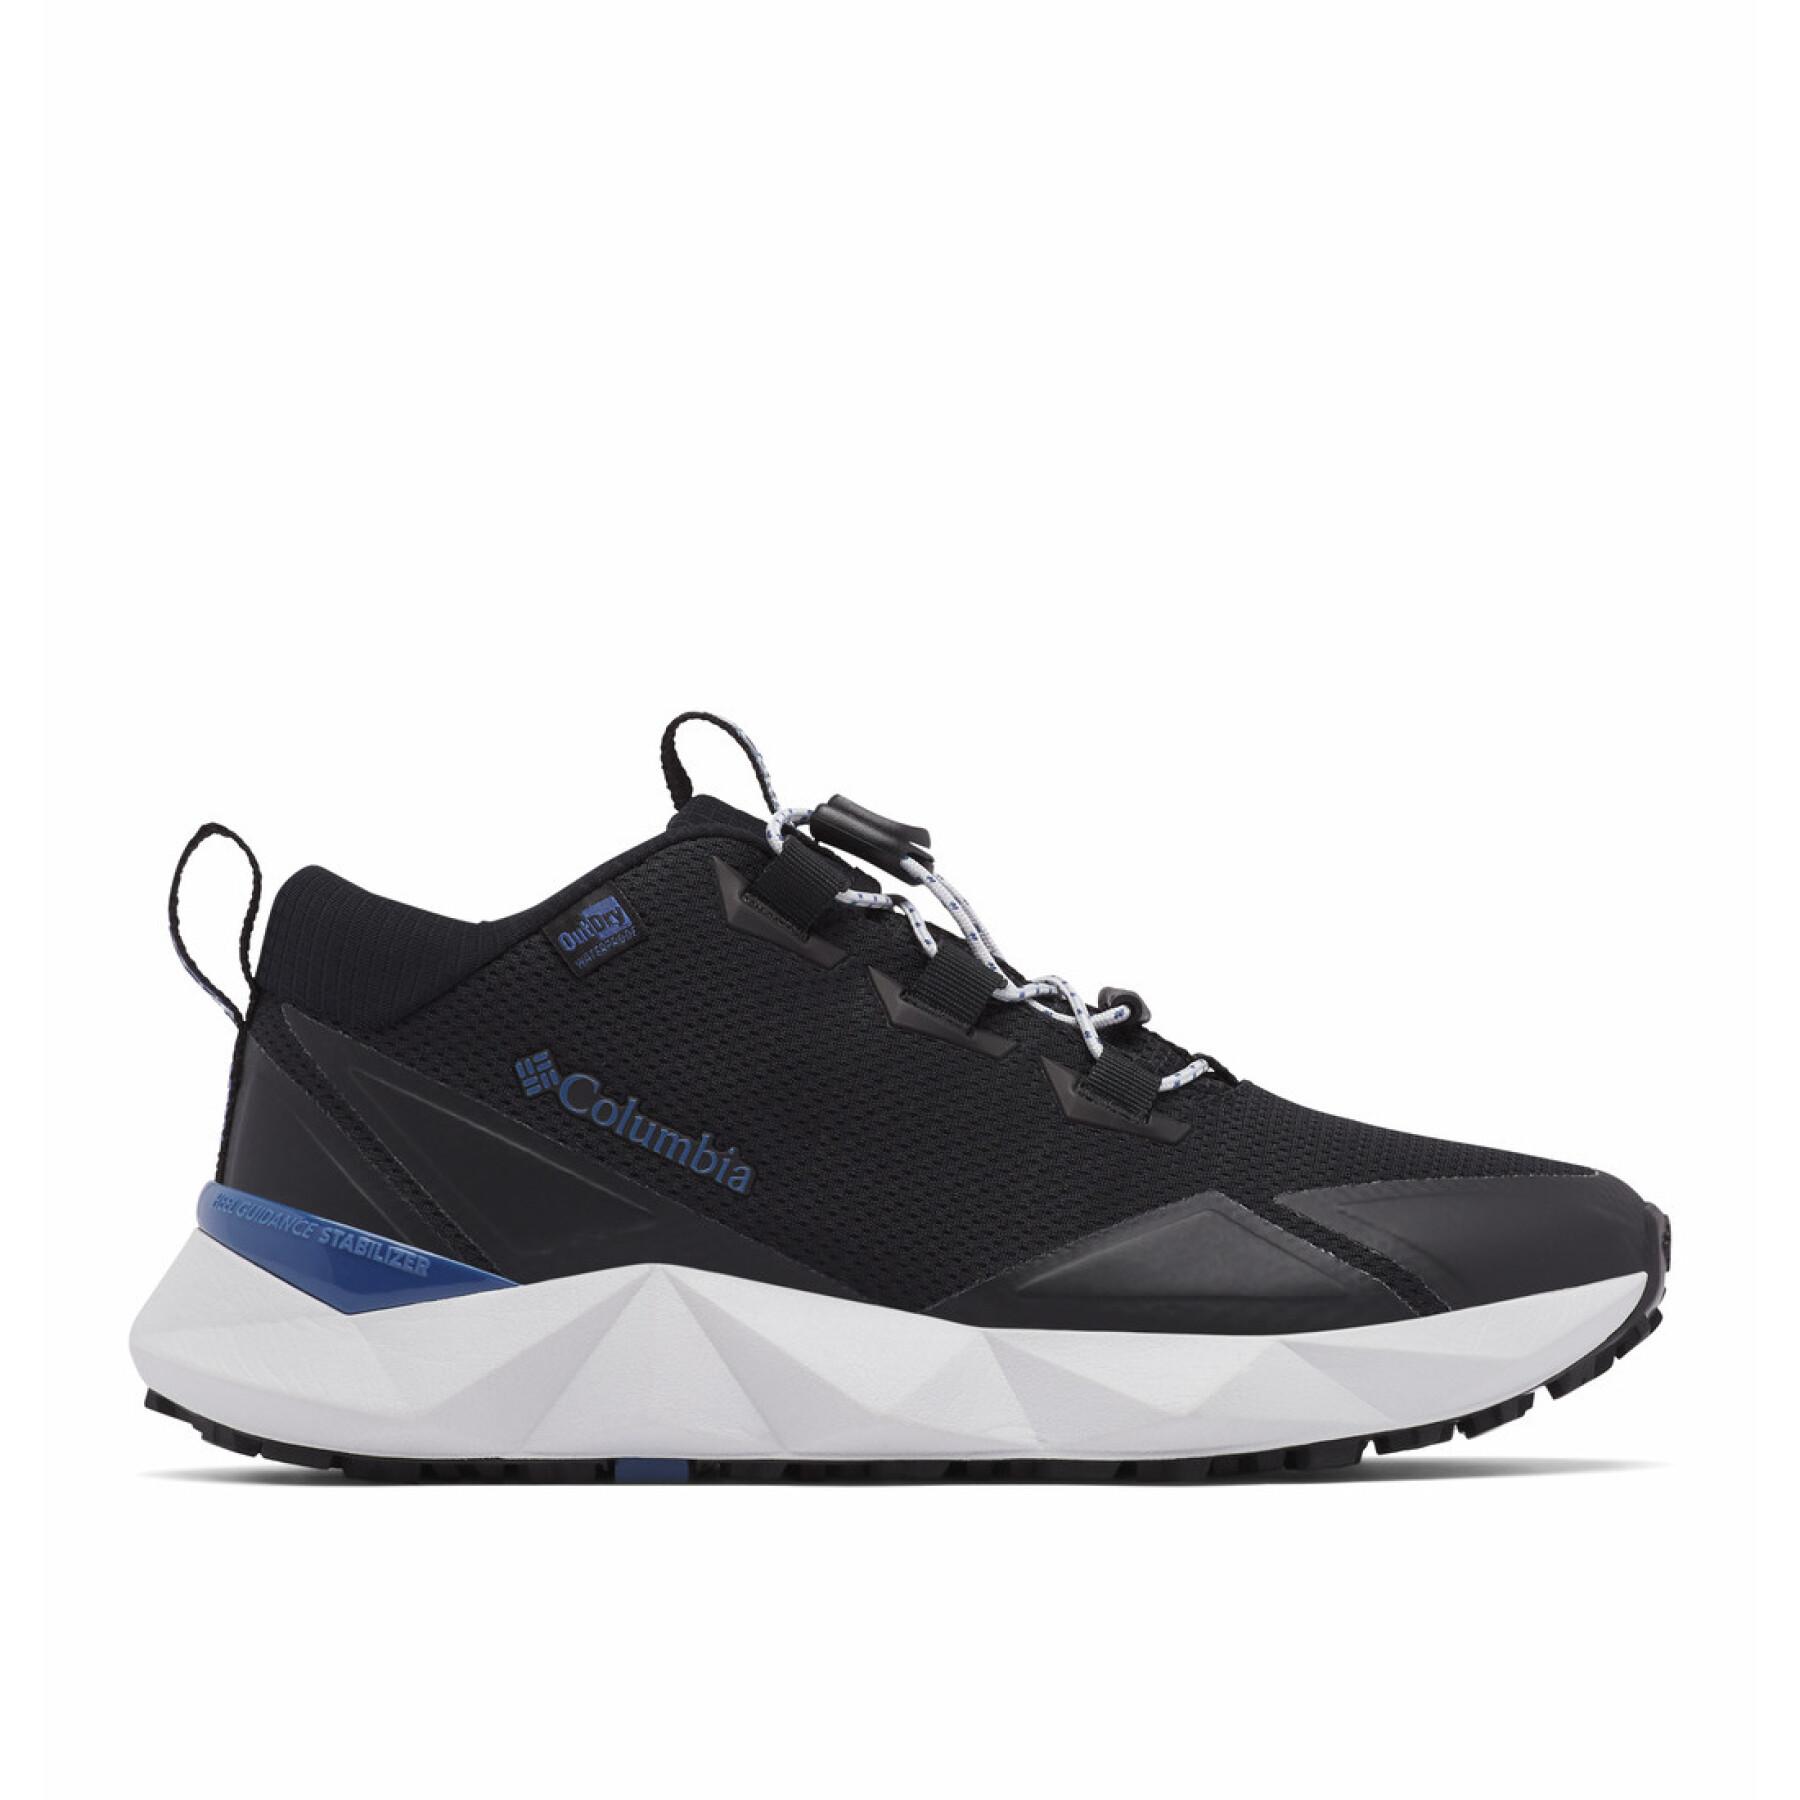 Buty damskie Columbia Facet 30 Outdry